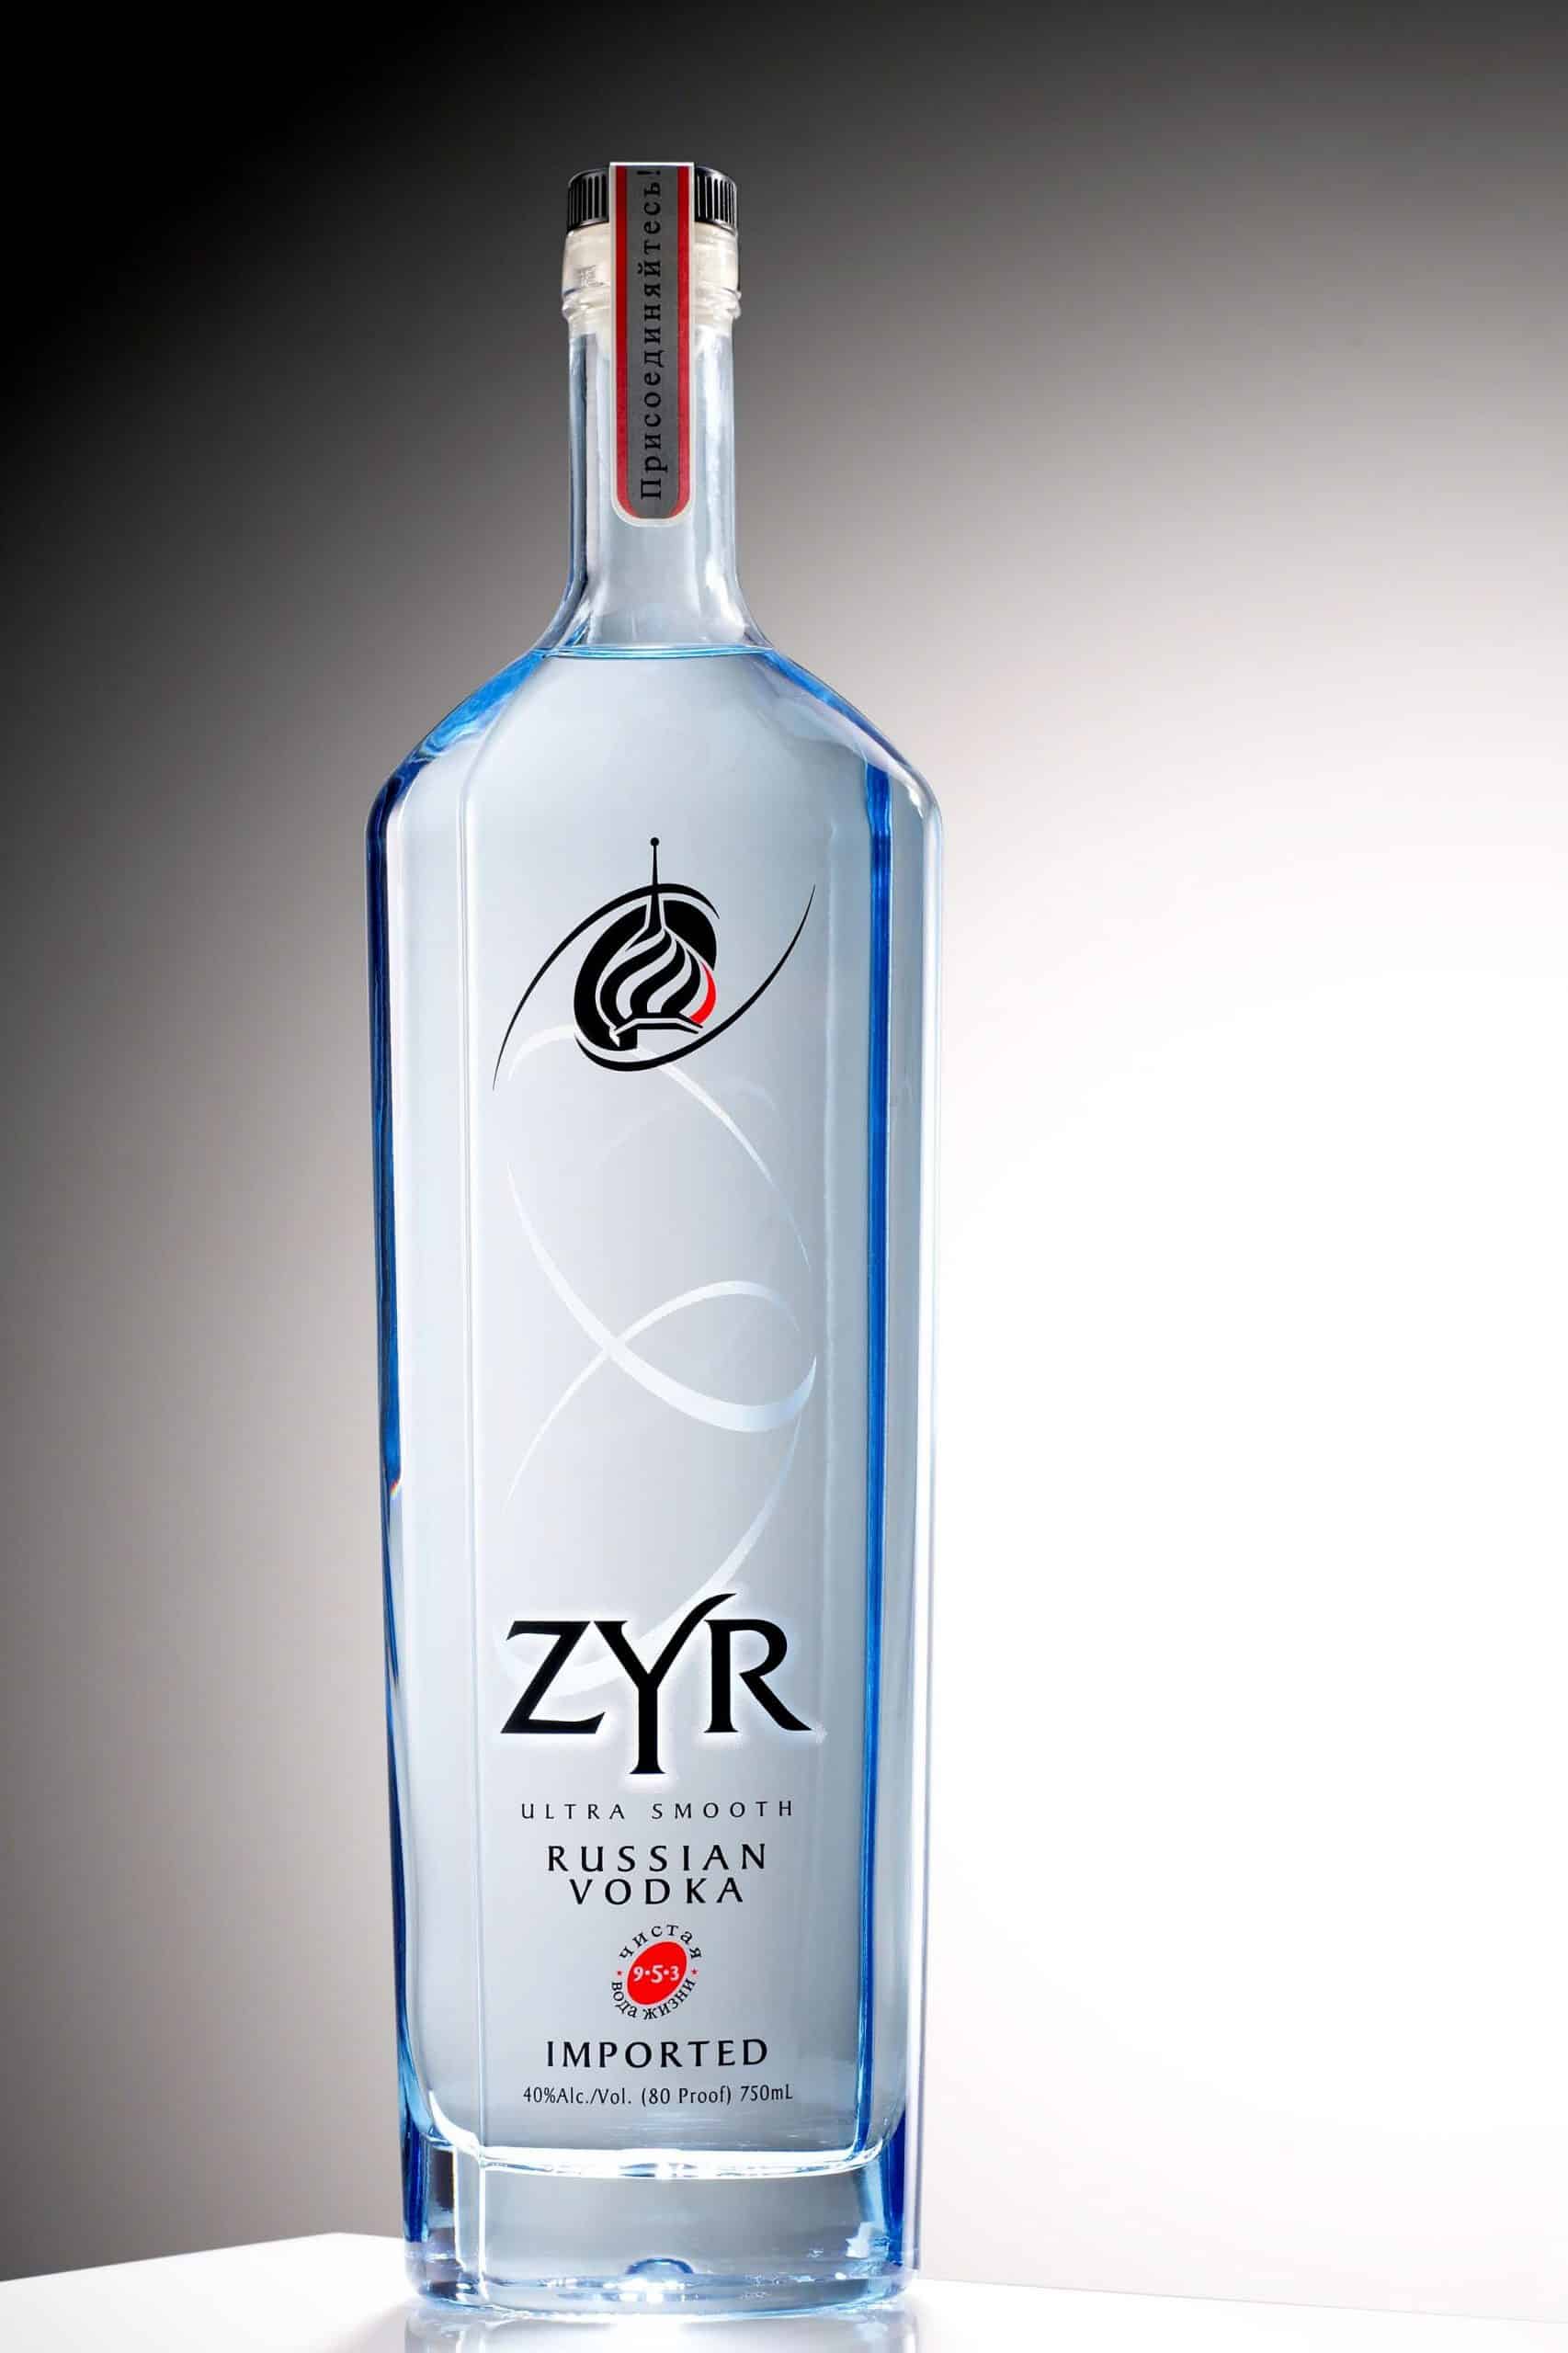 Explore 10 Fantastic Brands of Vodka From Around the World